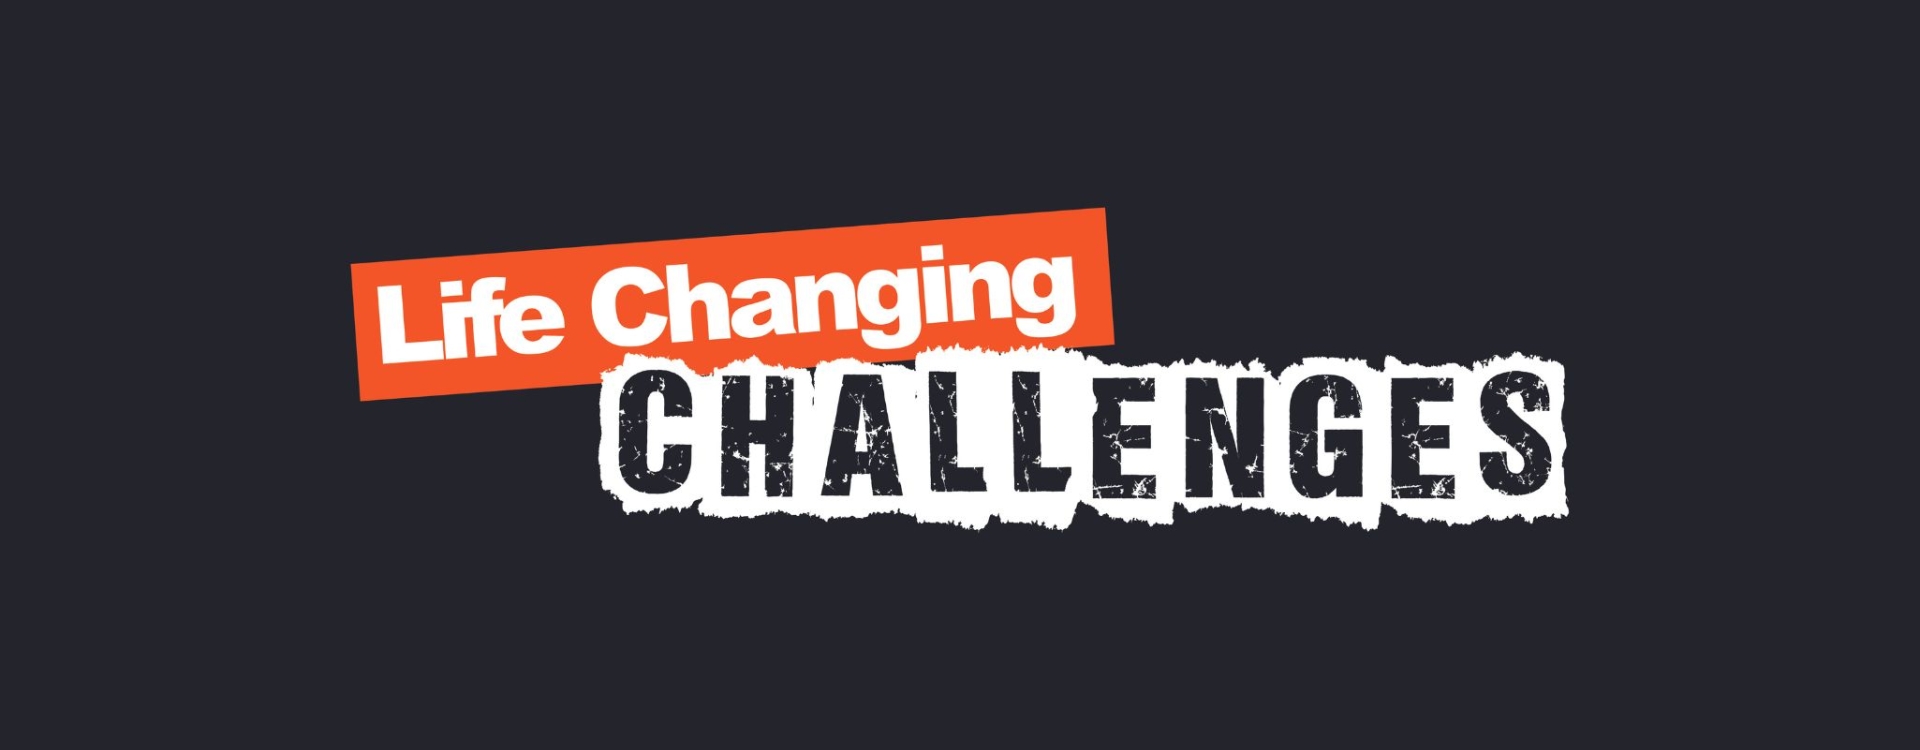 Life Changing Challenges Logo